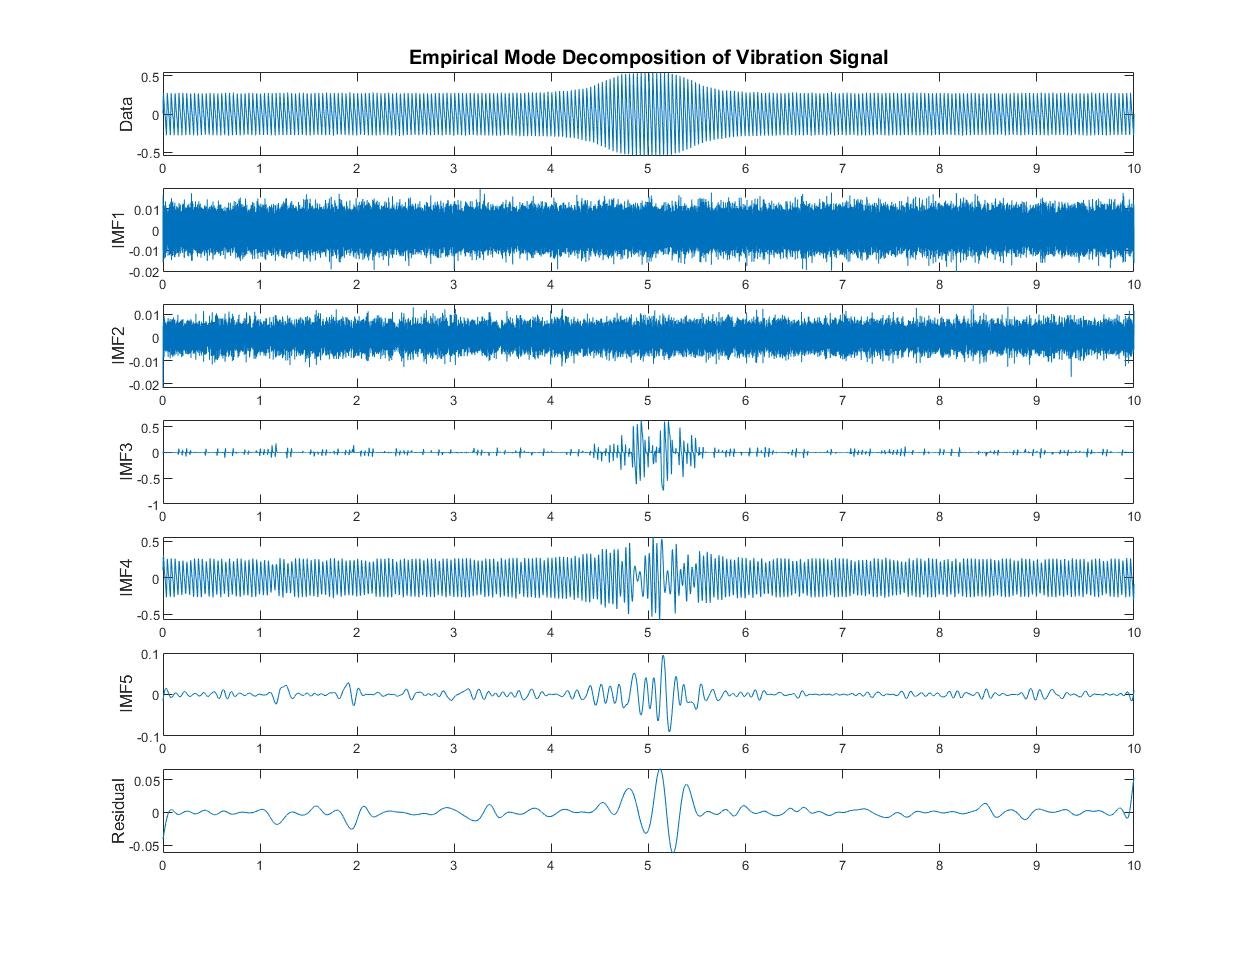 Vibration signal analyzed in MATLAB with empirical mode decomposition